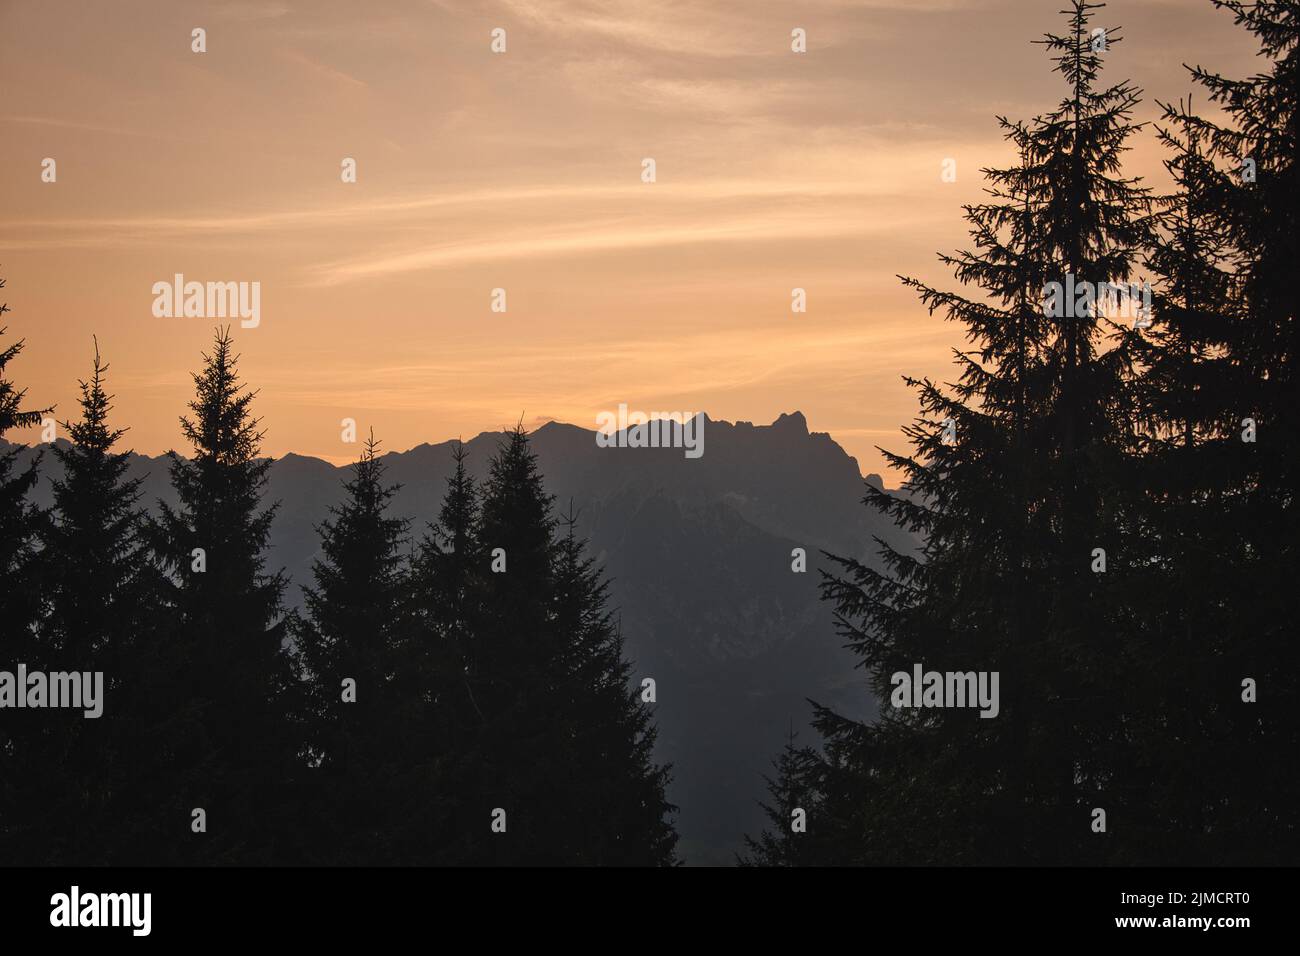 A stunning landscape of the Leogang Mountains in Salzburg, Austria, behind a pine tree forest at sunrise Stock Photo